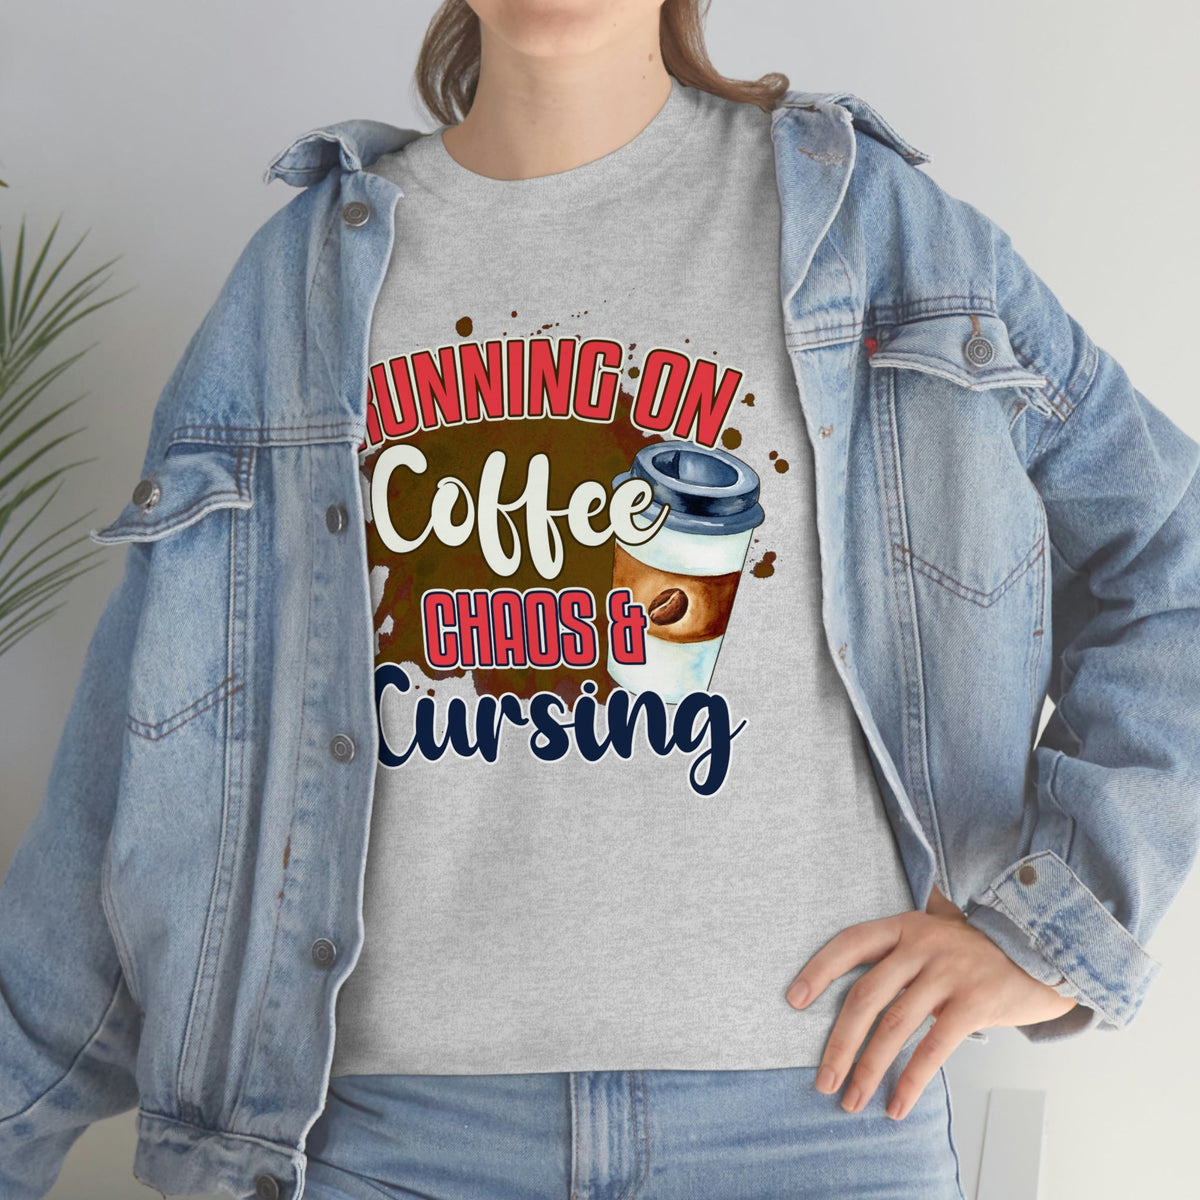 Running On Coffee, Cursing and Chaos Cotton Tee - Salty Medic Clothing Co.